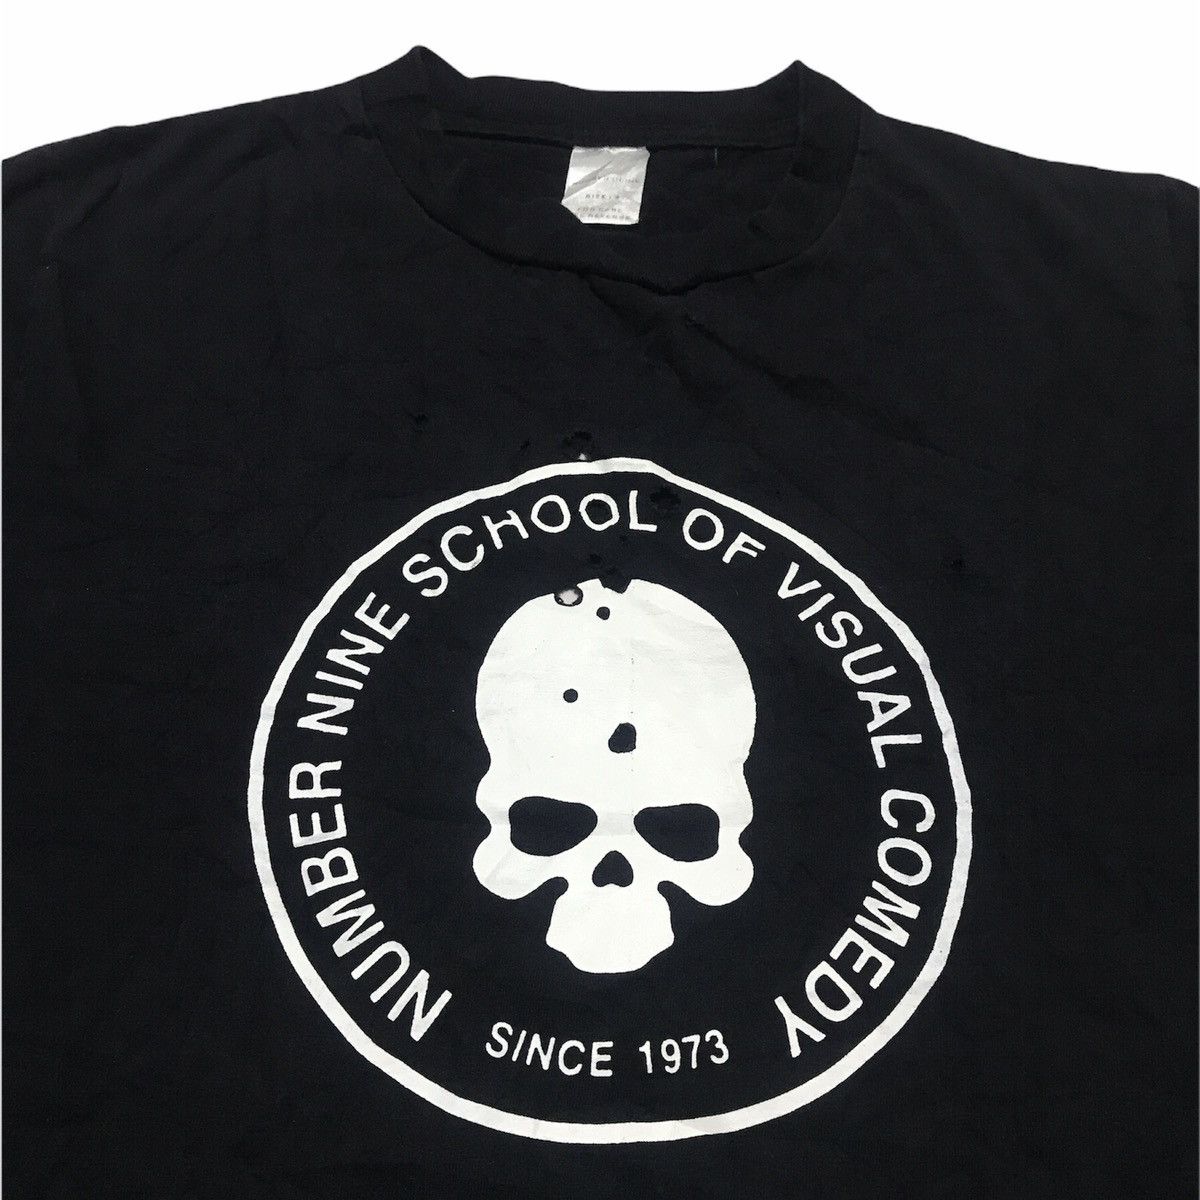 SS01 Number Nine school of visual comedy distressed T shirt - 4